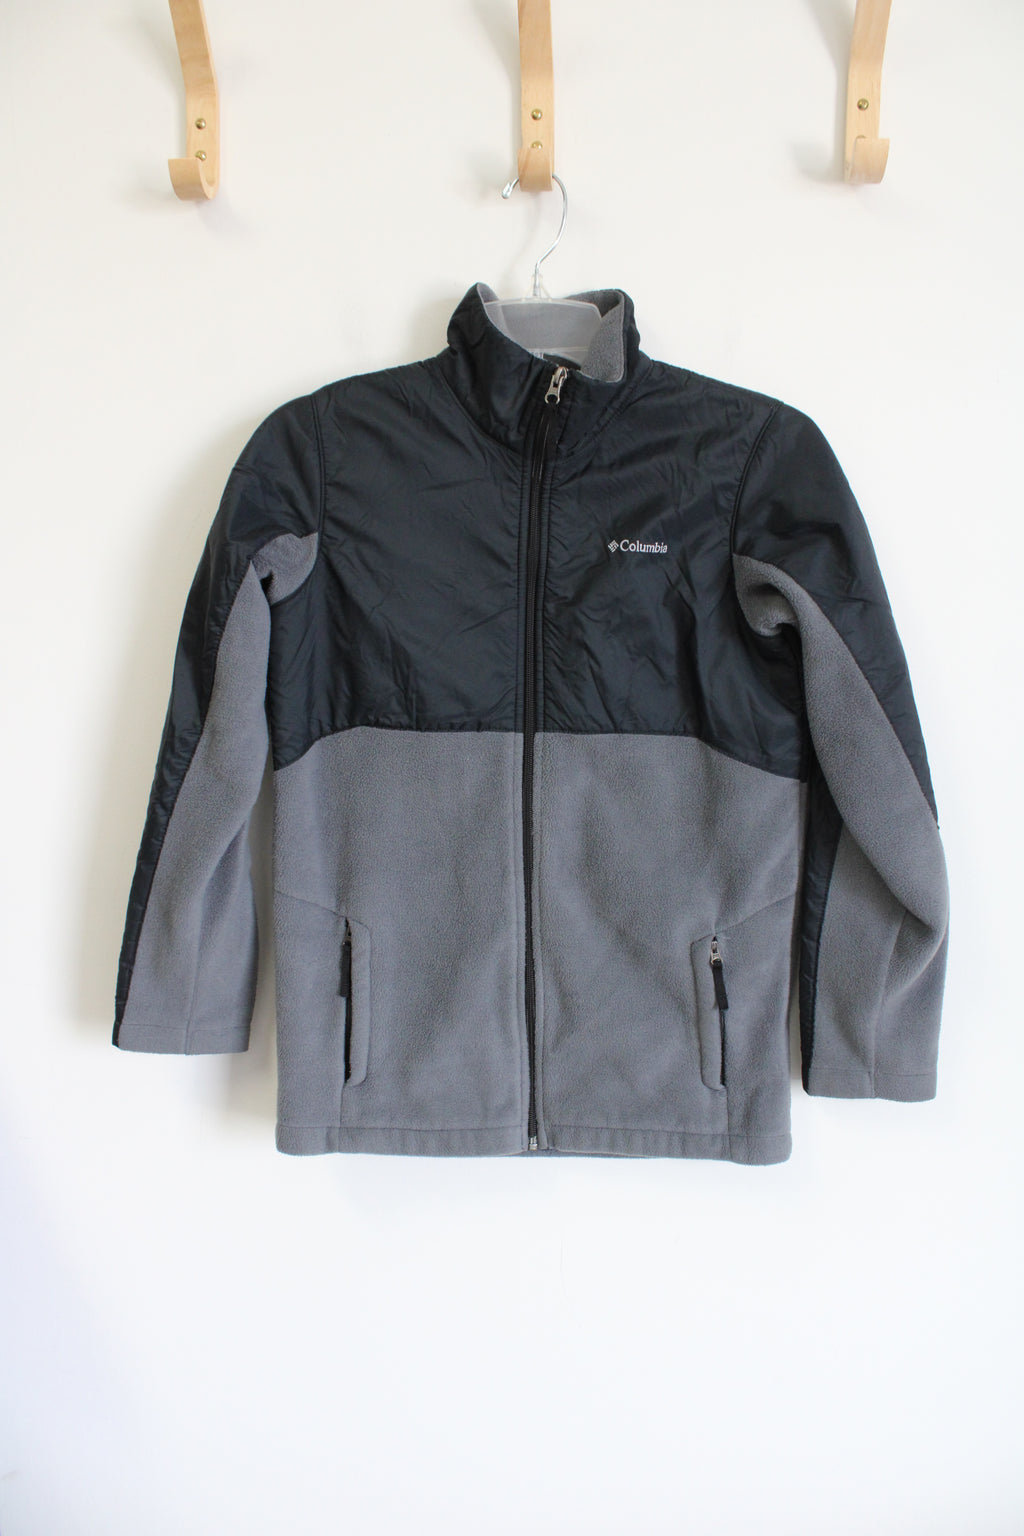 Colombia Black & Gray Lightweight Jacket | Youth L (14/16)